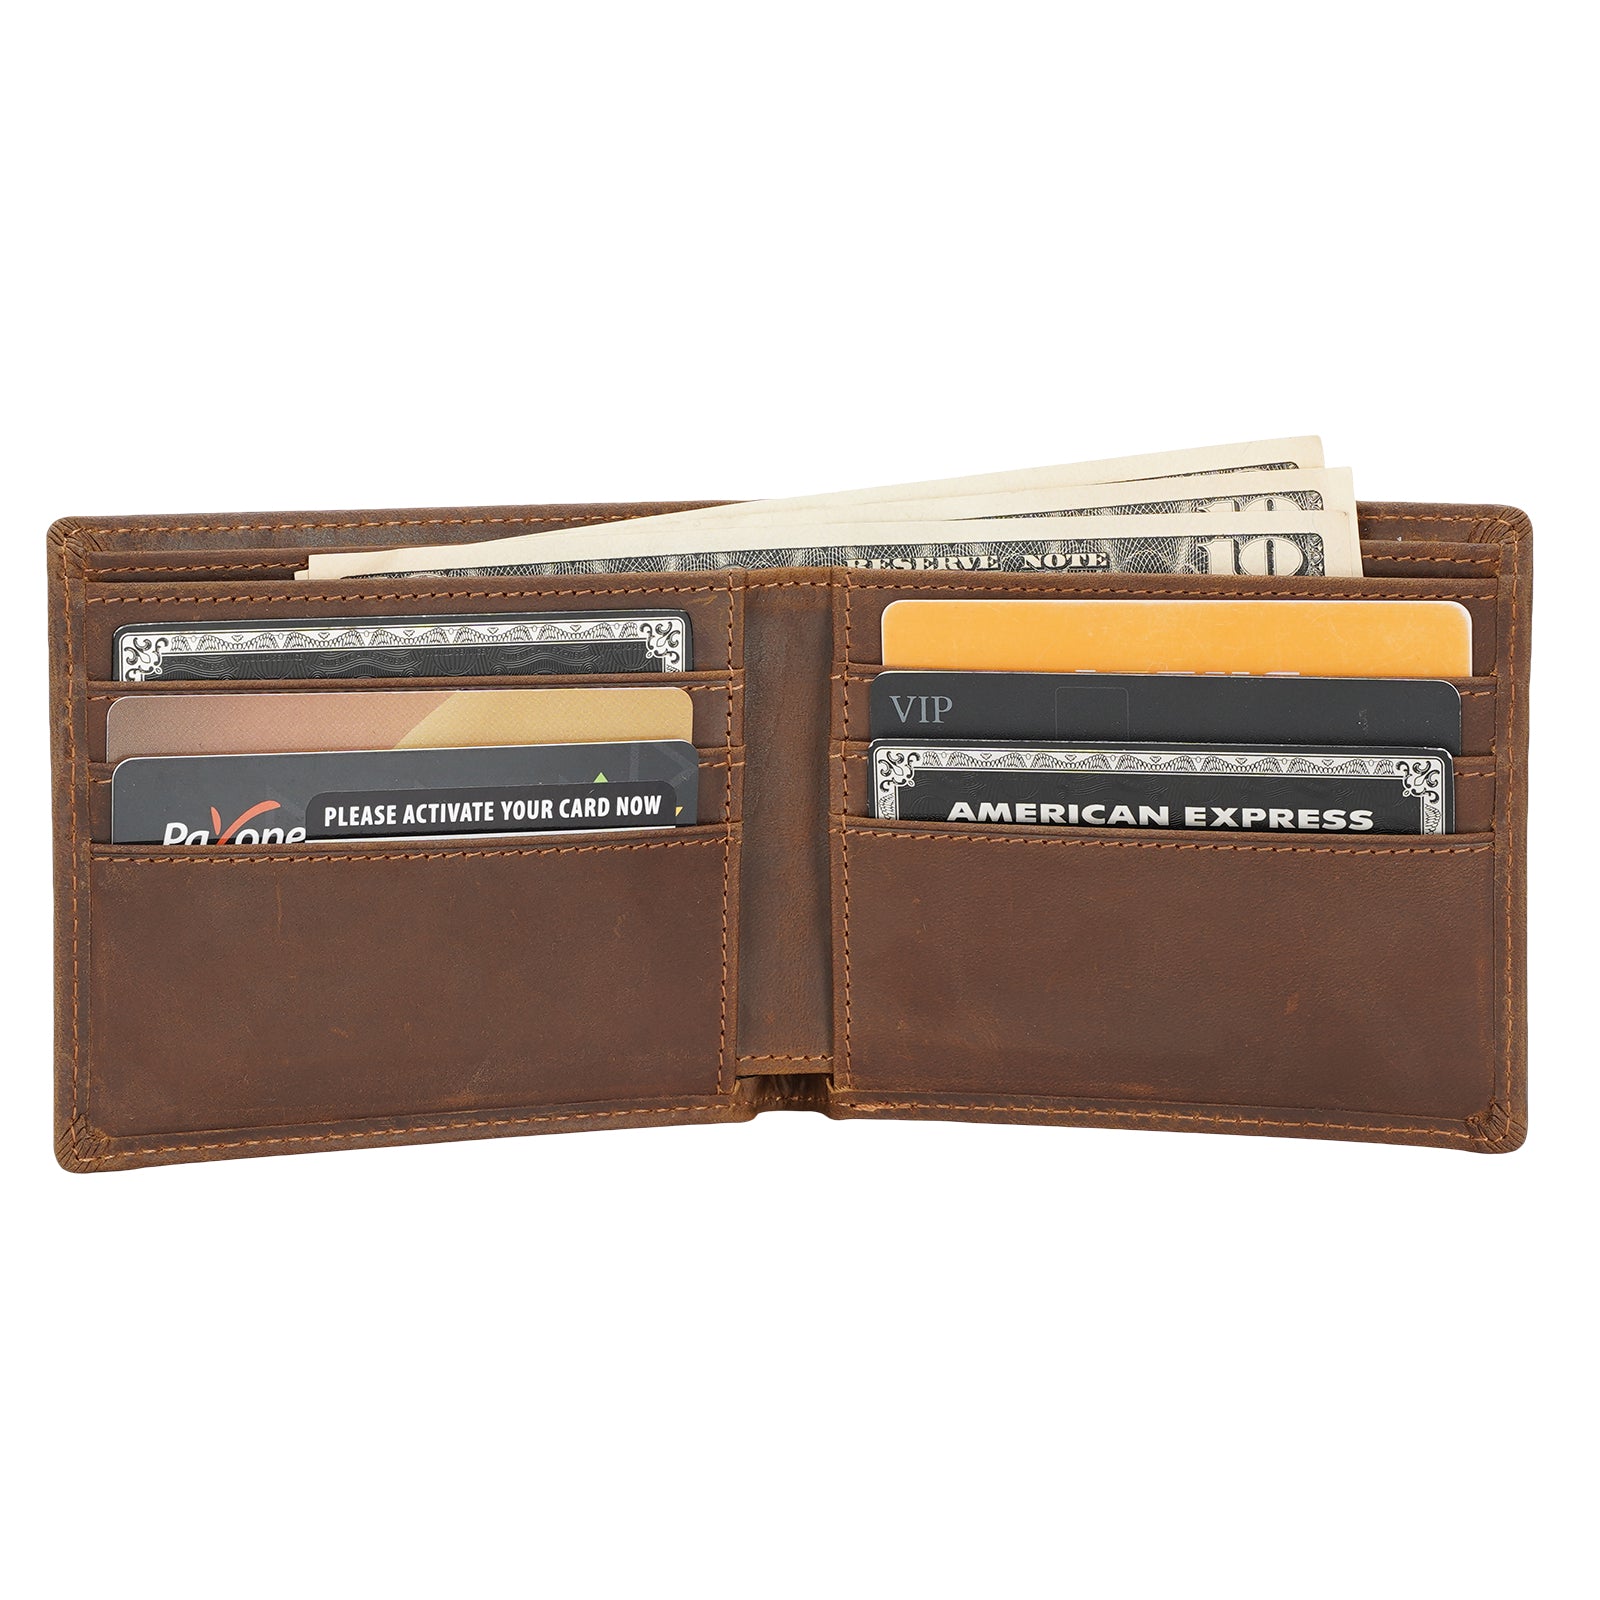 Mens Leather Bifold Wallets